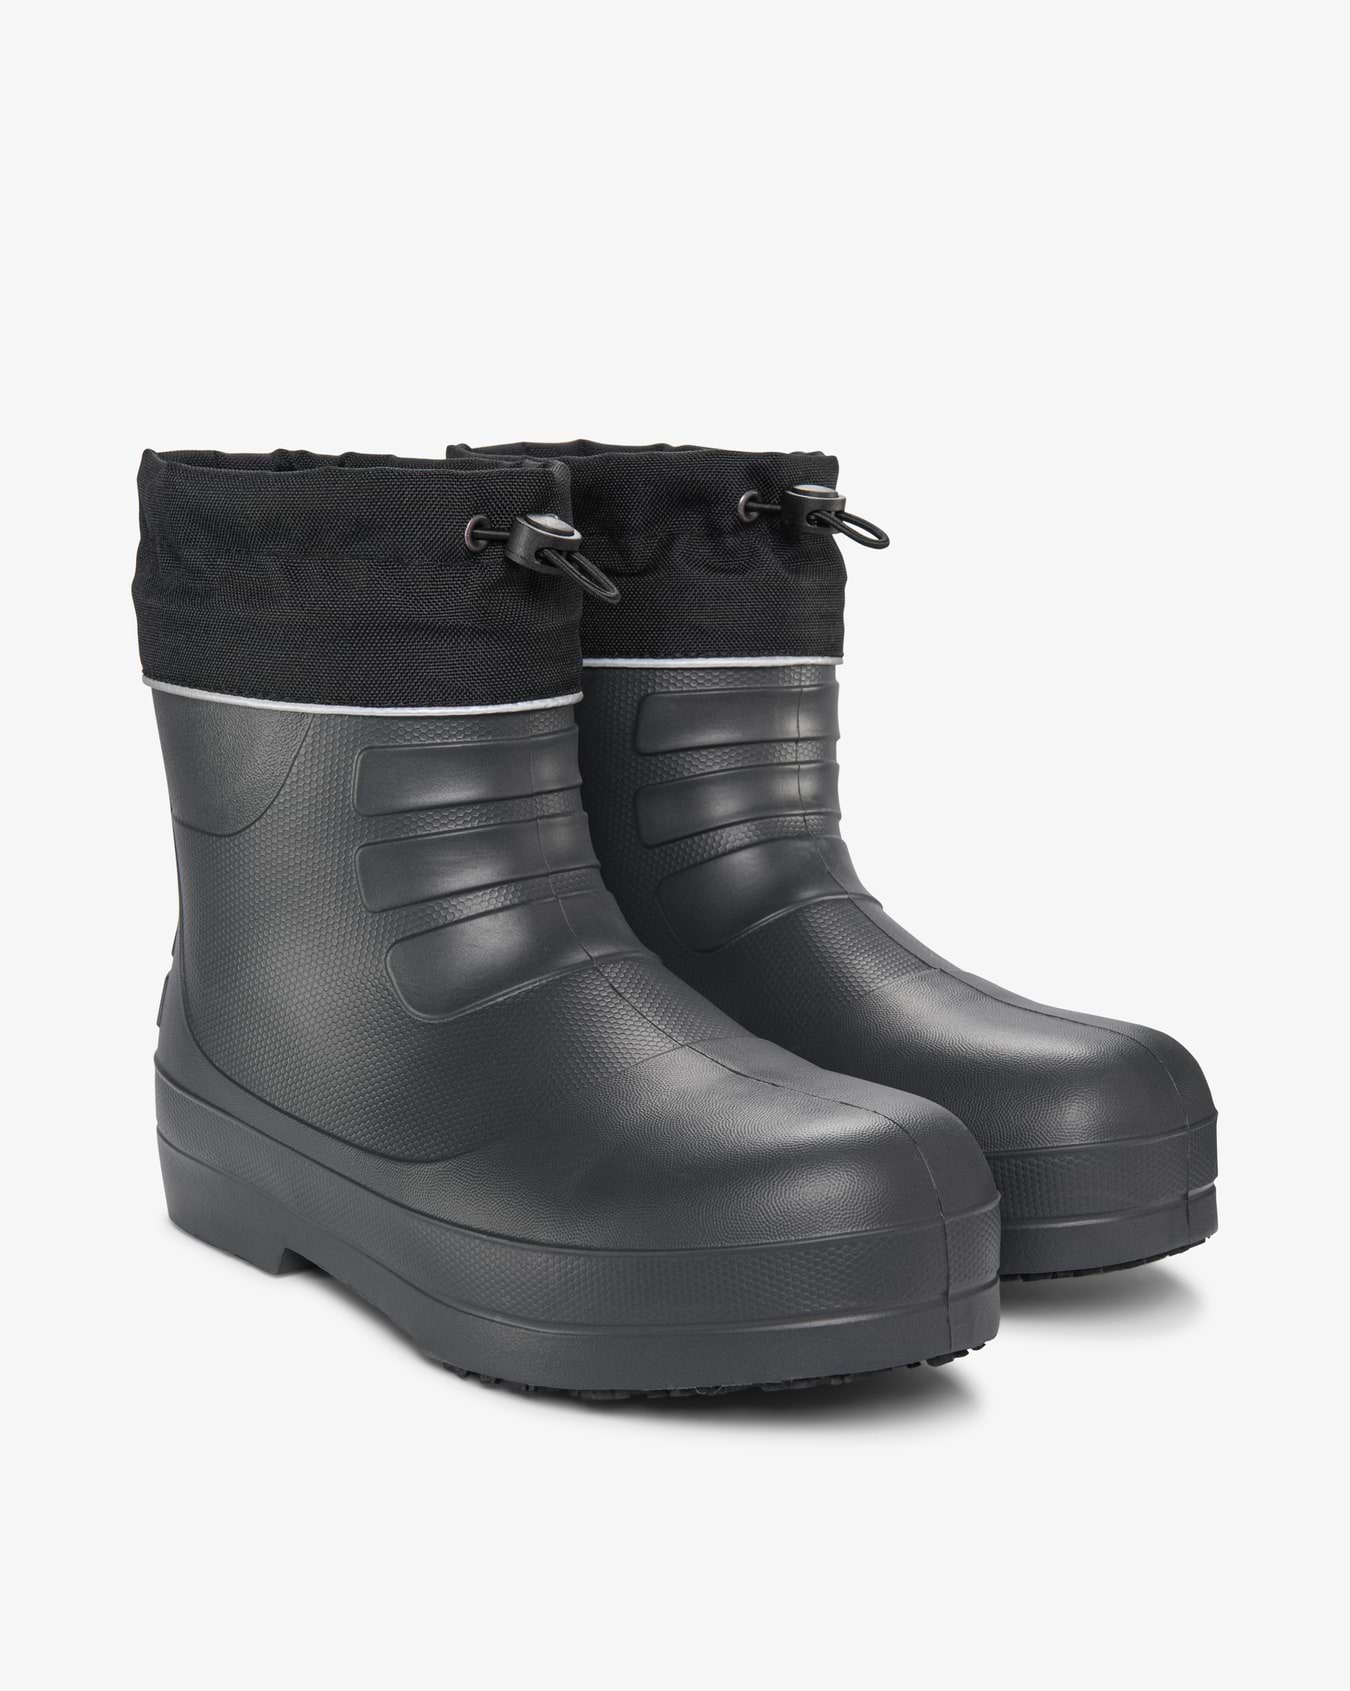 Norse Black/Charcoal Low Boot